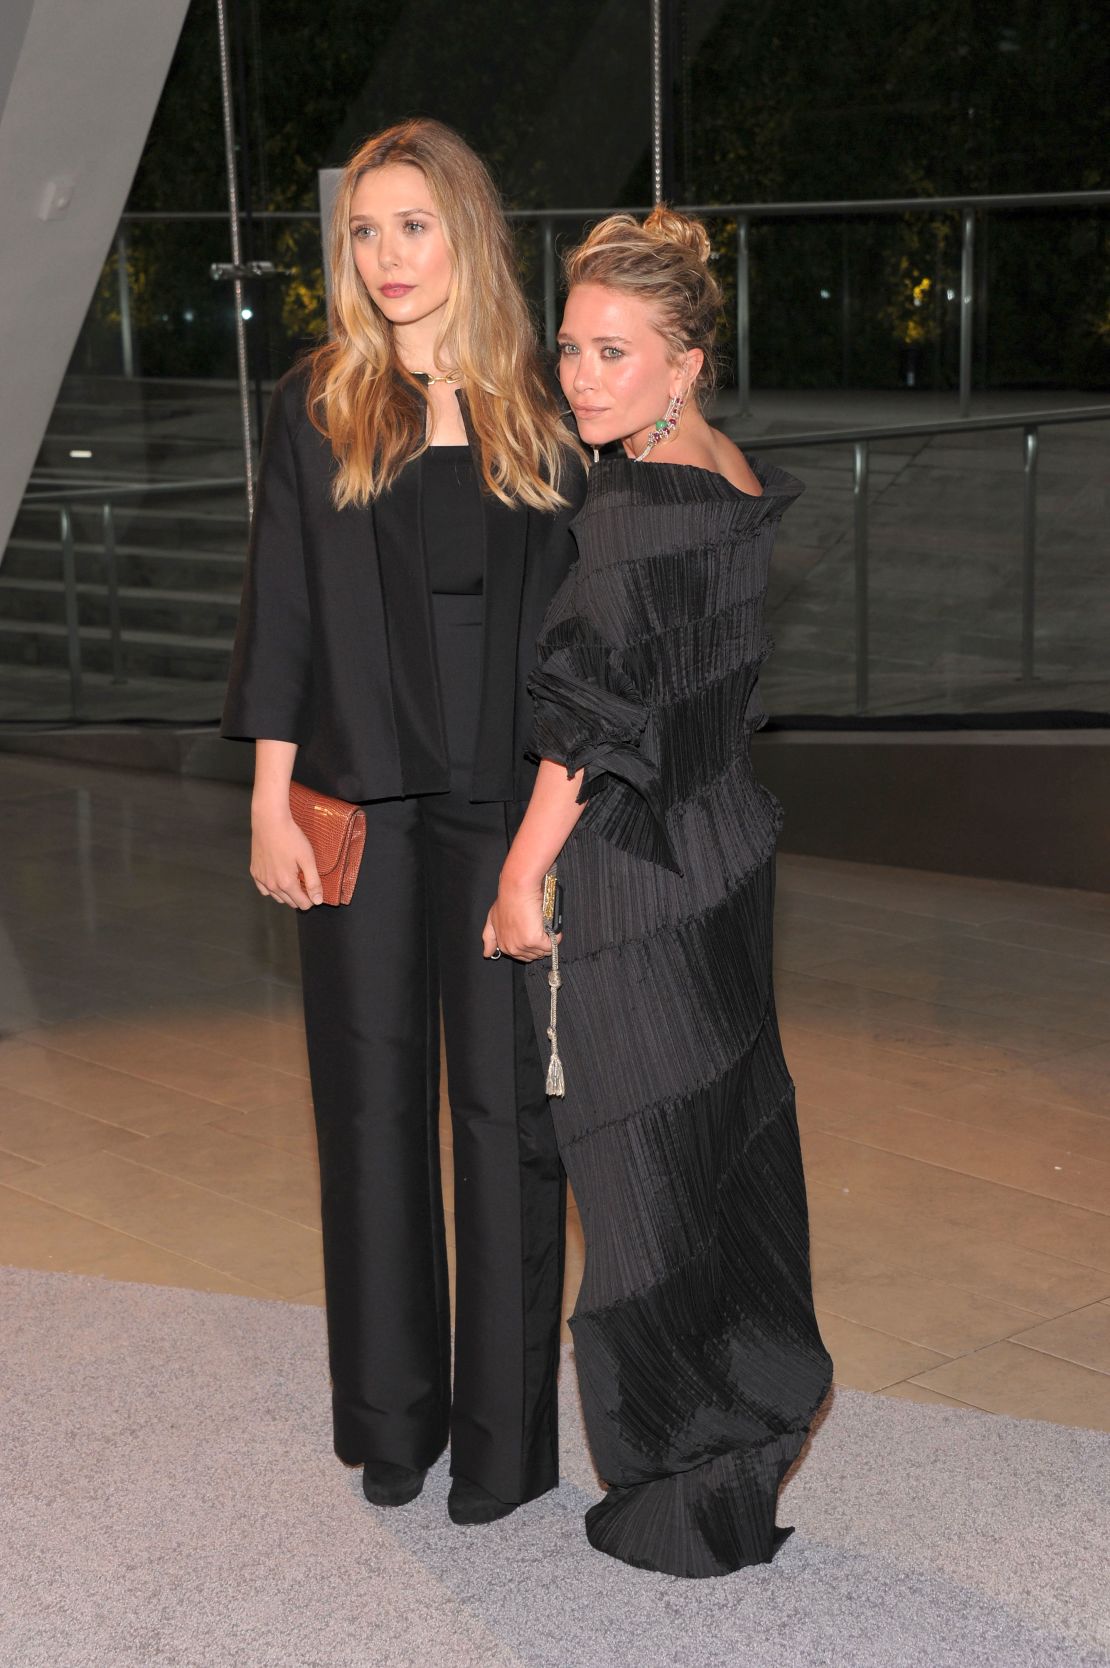 Mary-Kate Olsen wearing Issey Miyake to attend the 2013 CFDA Fashion Awards